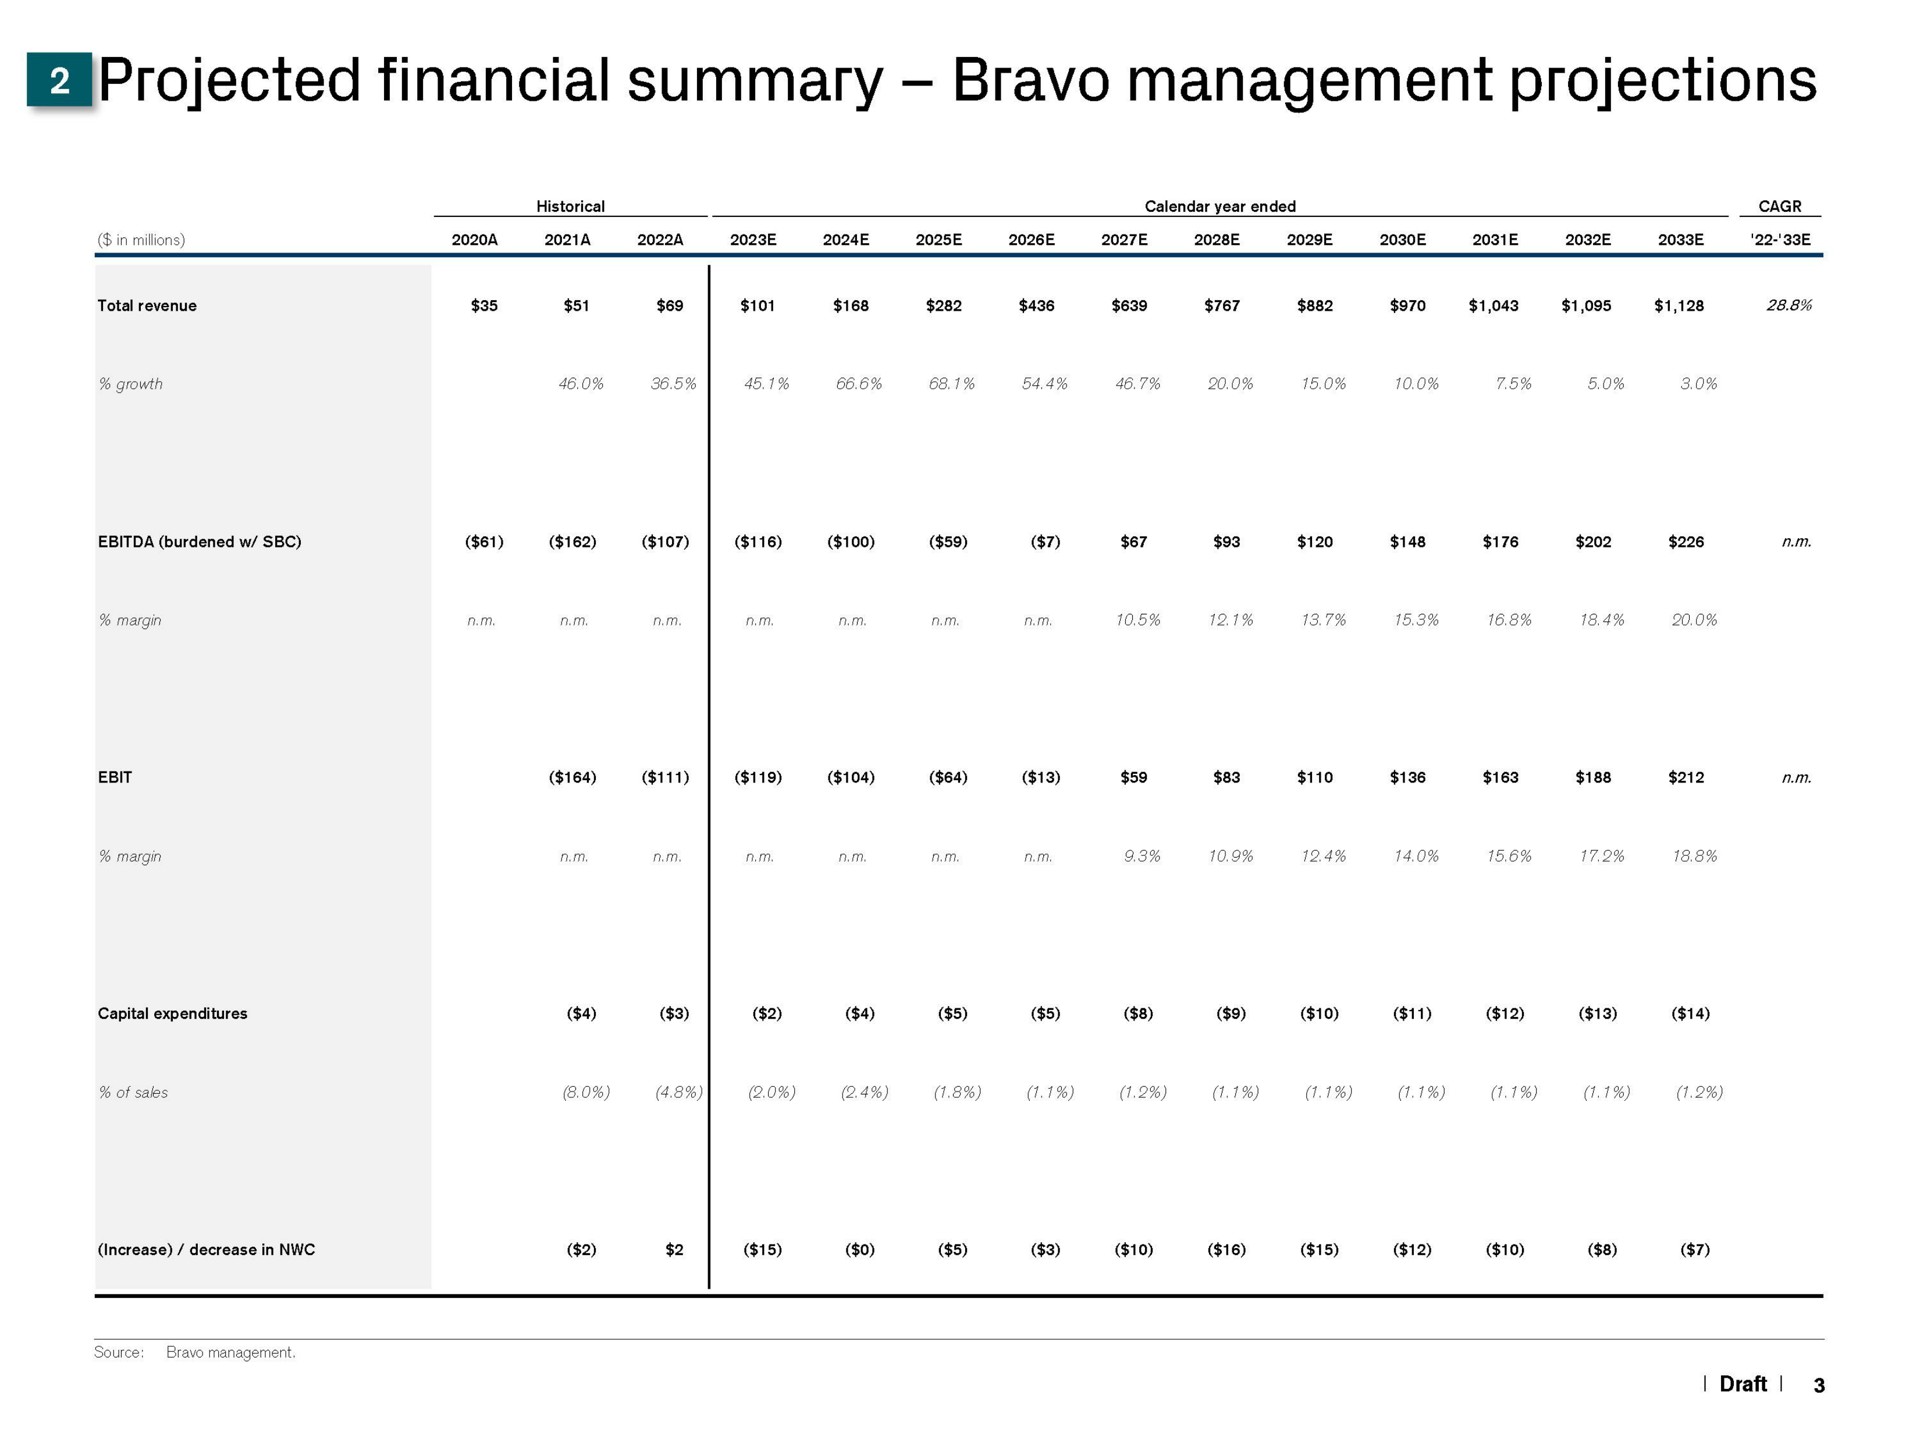 projected financial summary bravo management projections | Credit Suisse